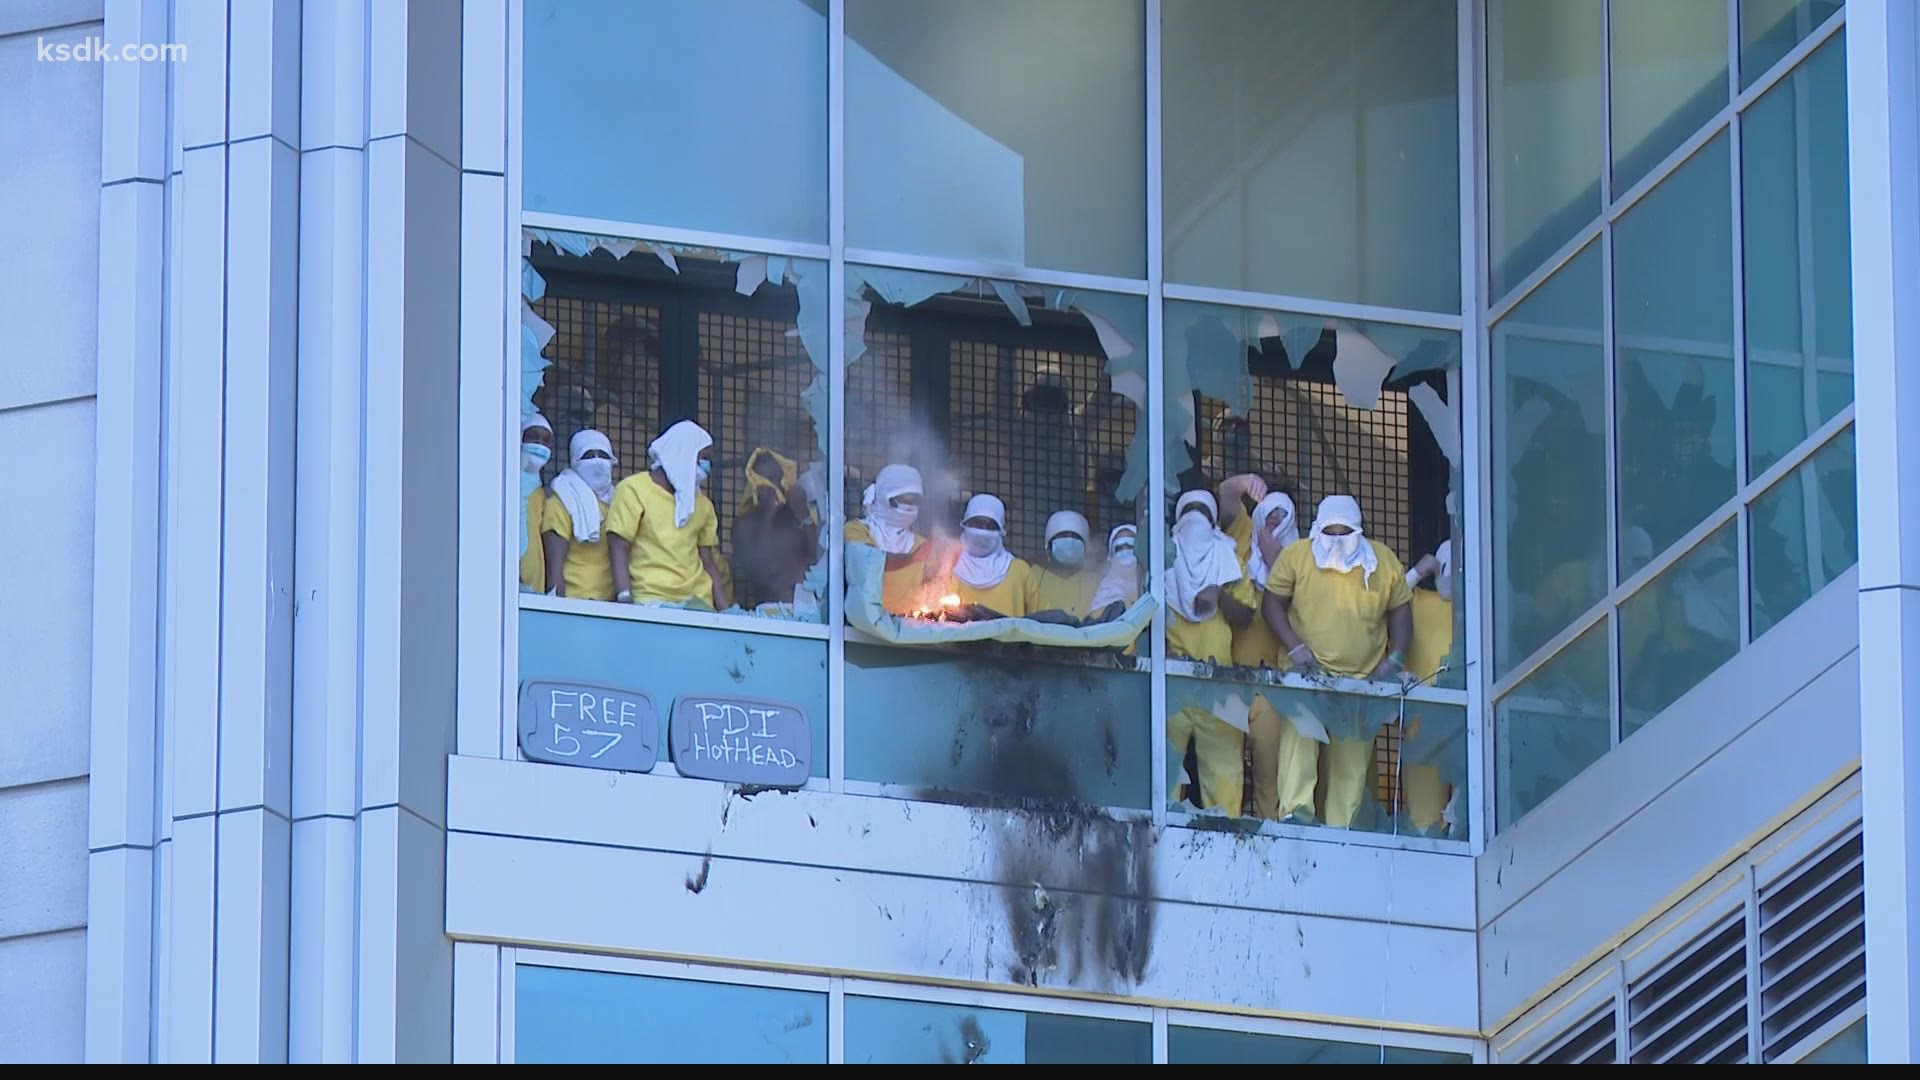 “Inhumane conditions” are the reason why inmates set fire and broke windows over the weekend